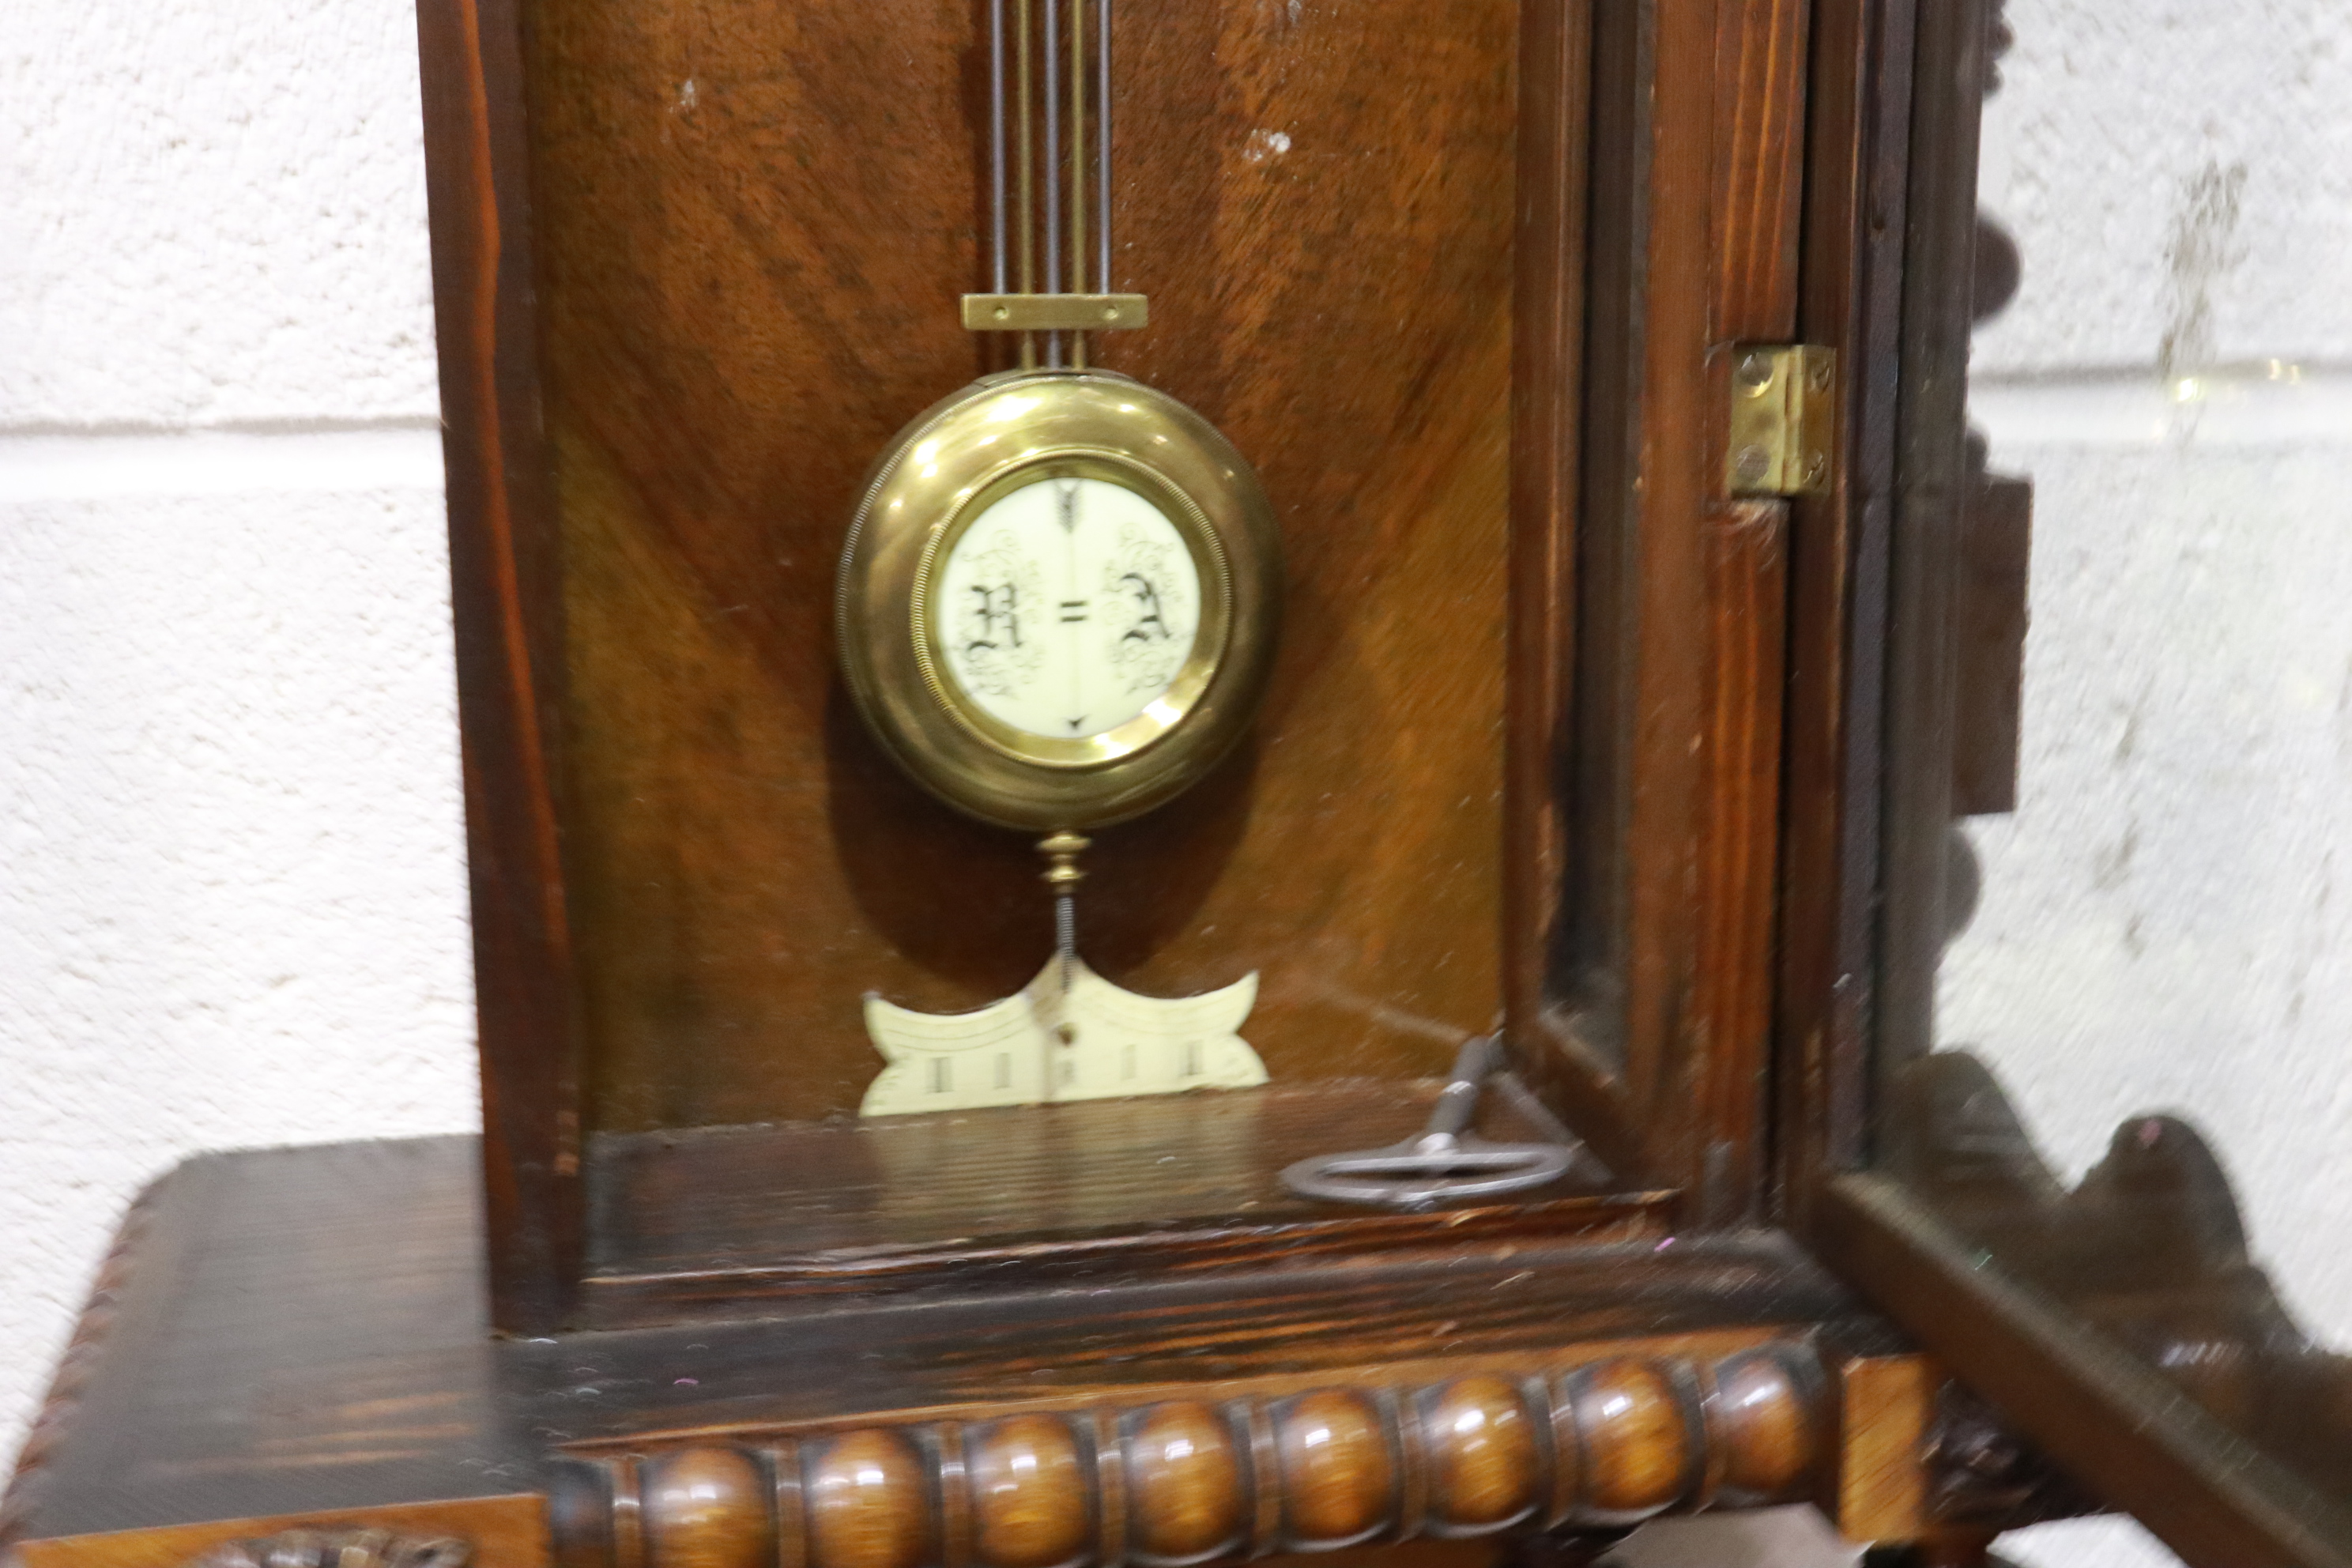 19th century walnut cased Vienna wall clock with pendulum display door, H: 105 cm. Not available for - Image 4 of 4